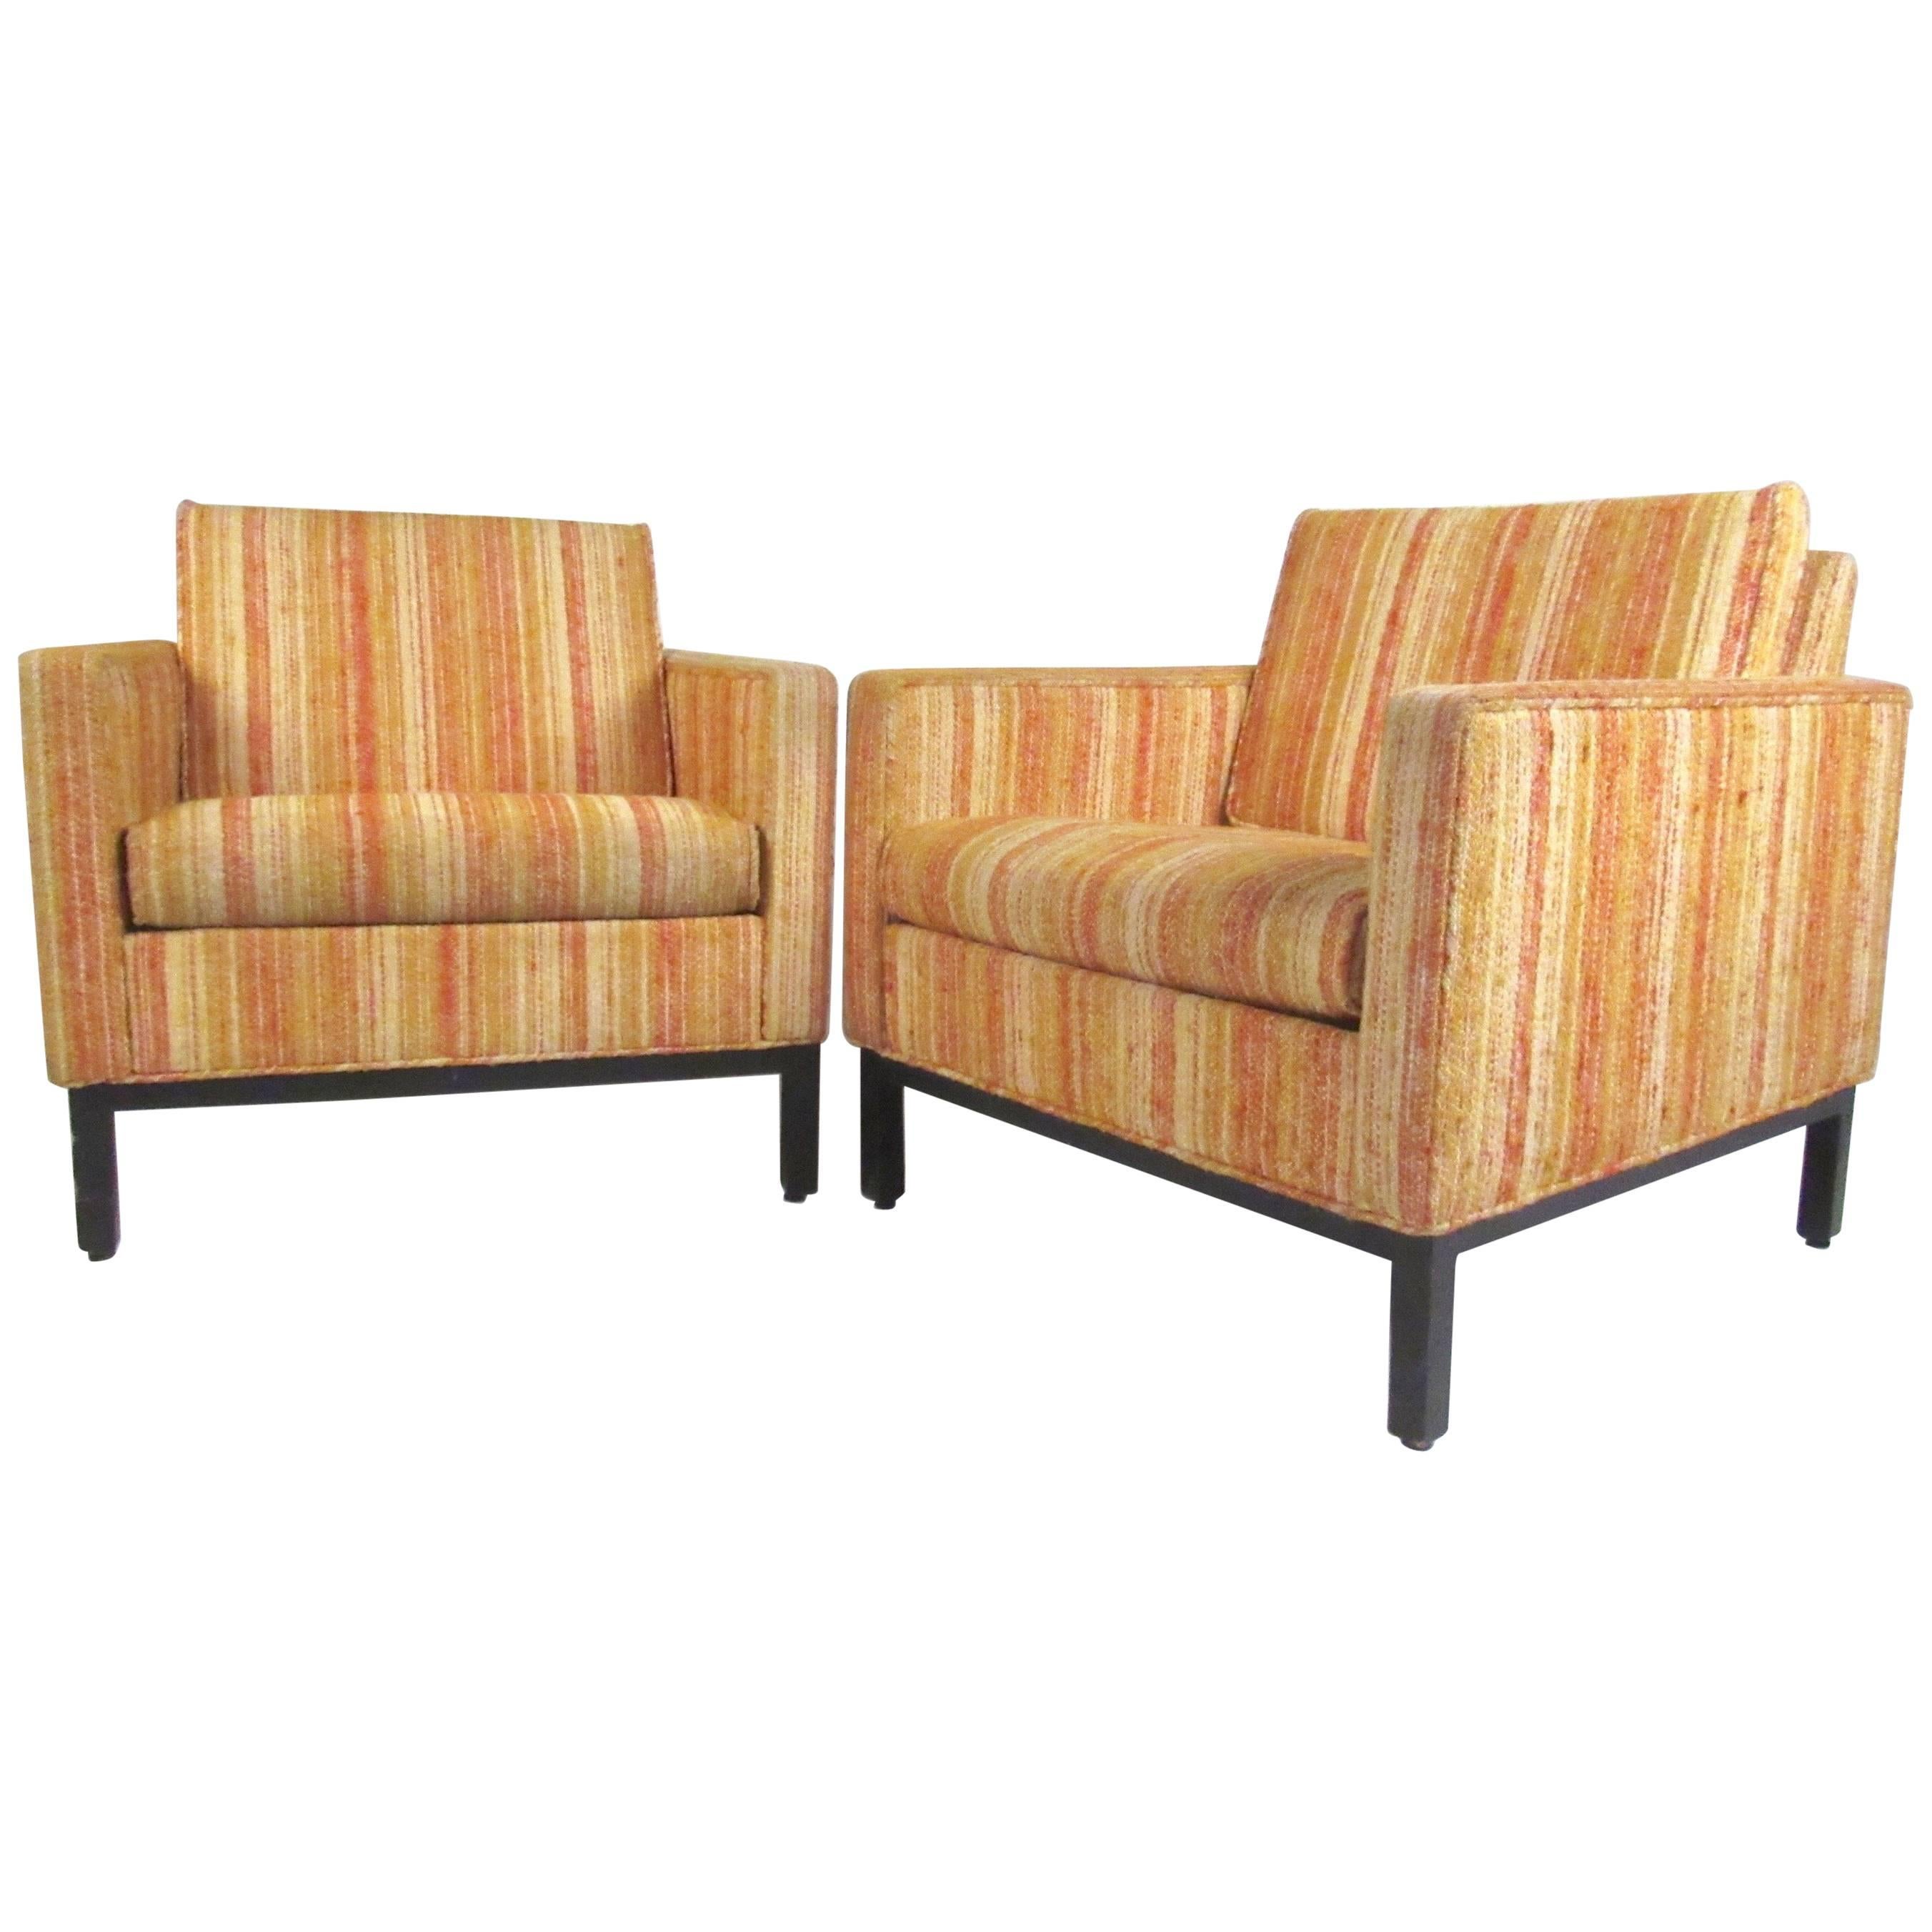 Pair of Vintage Modern Club Chairs with Kravet Upholstery